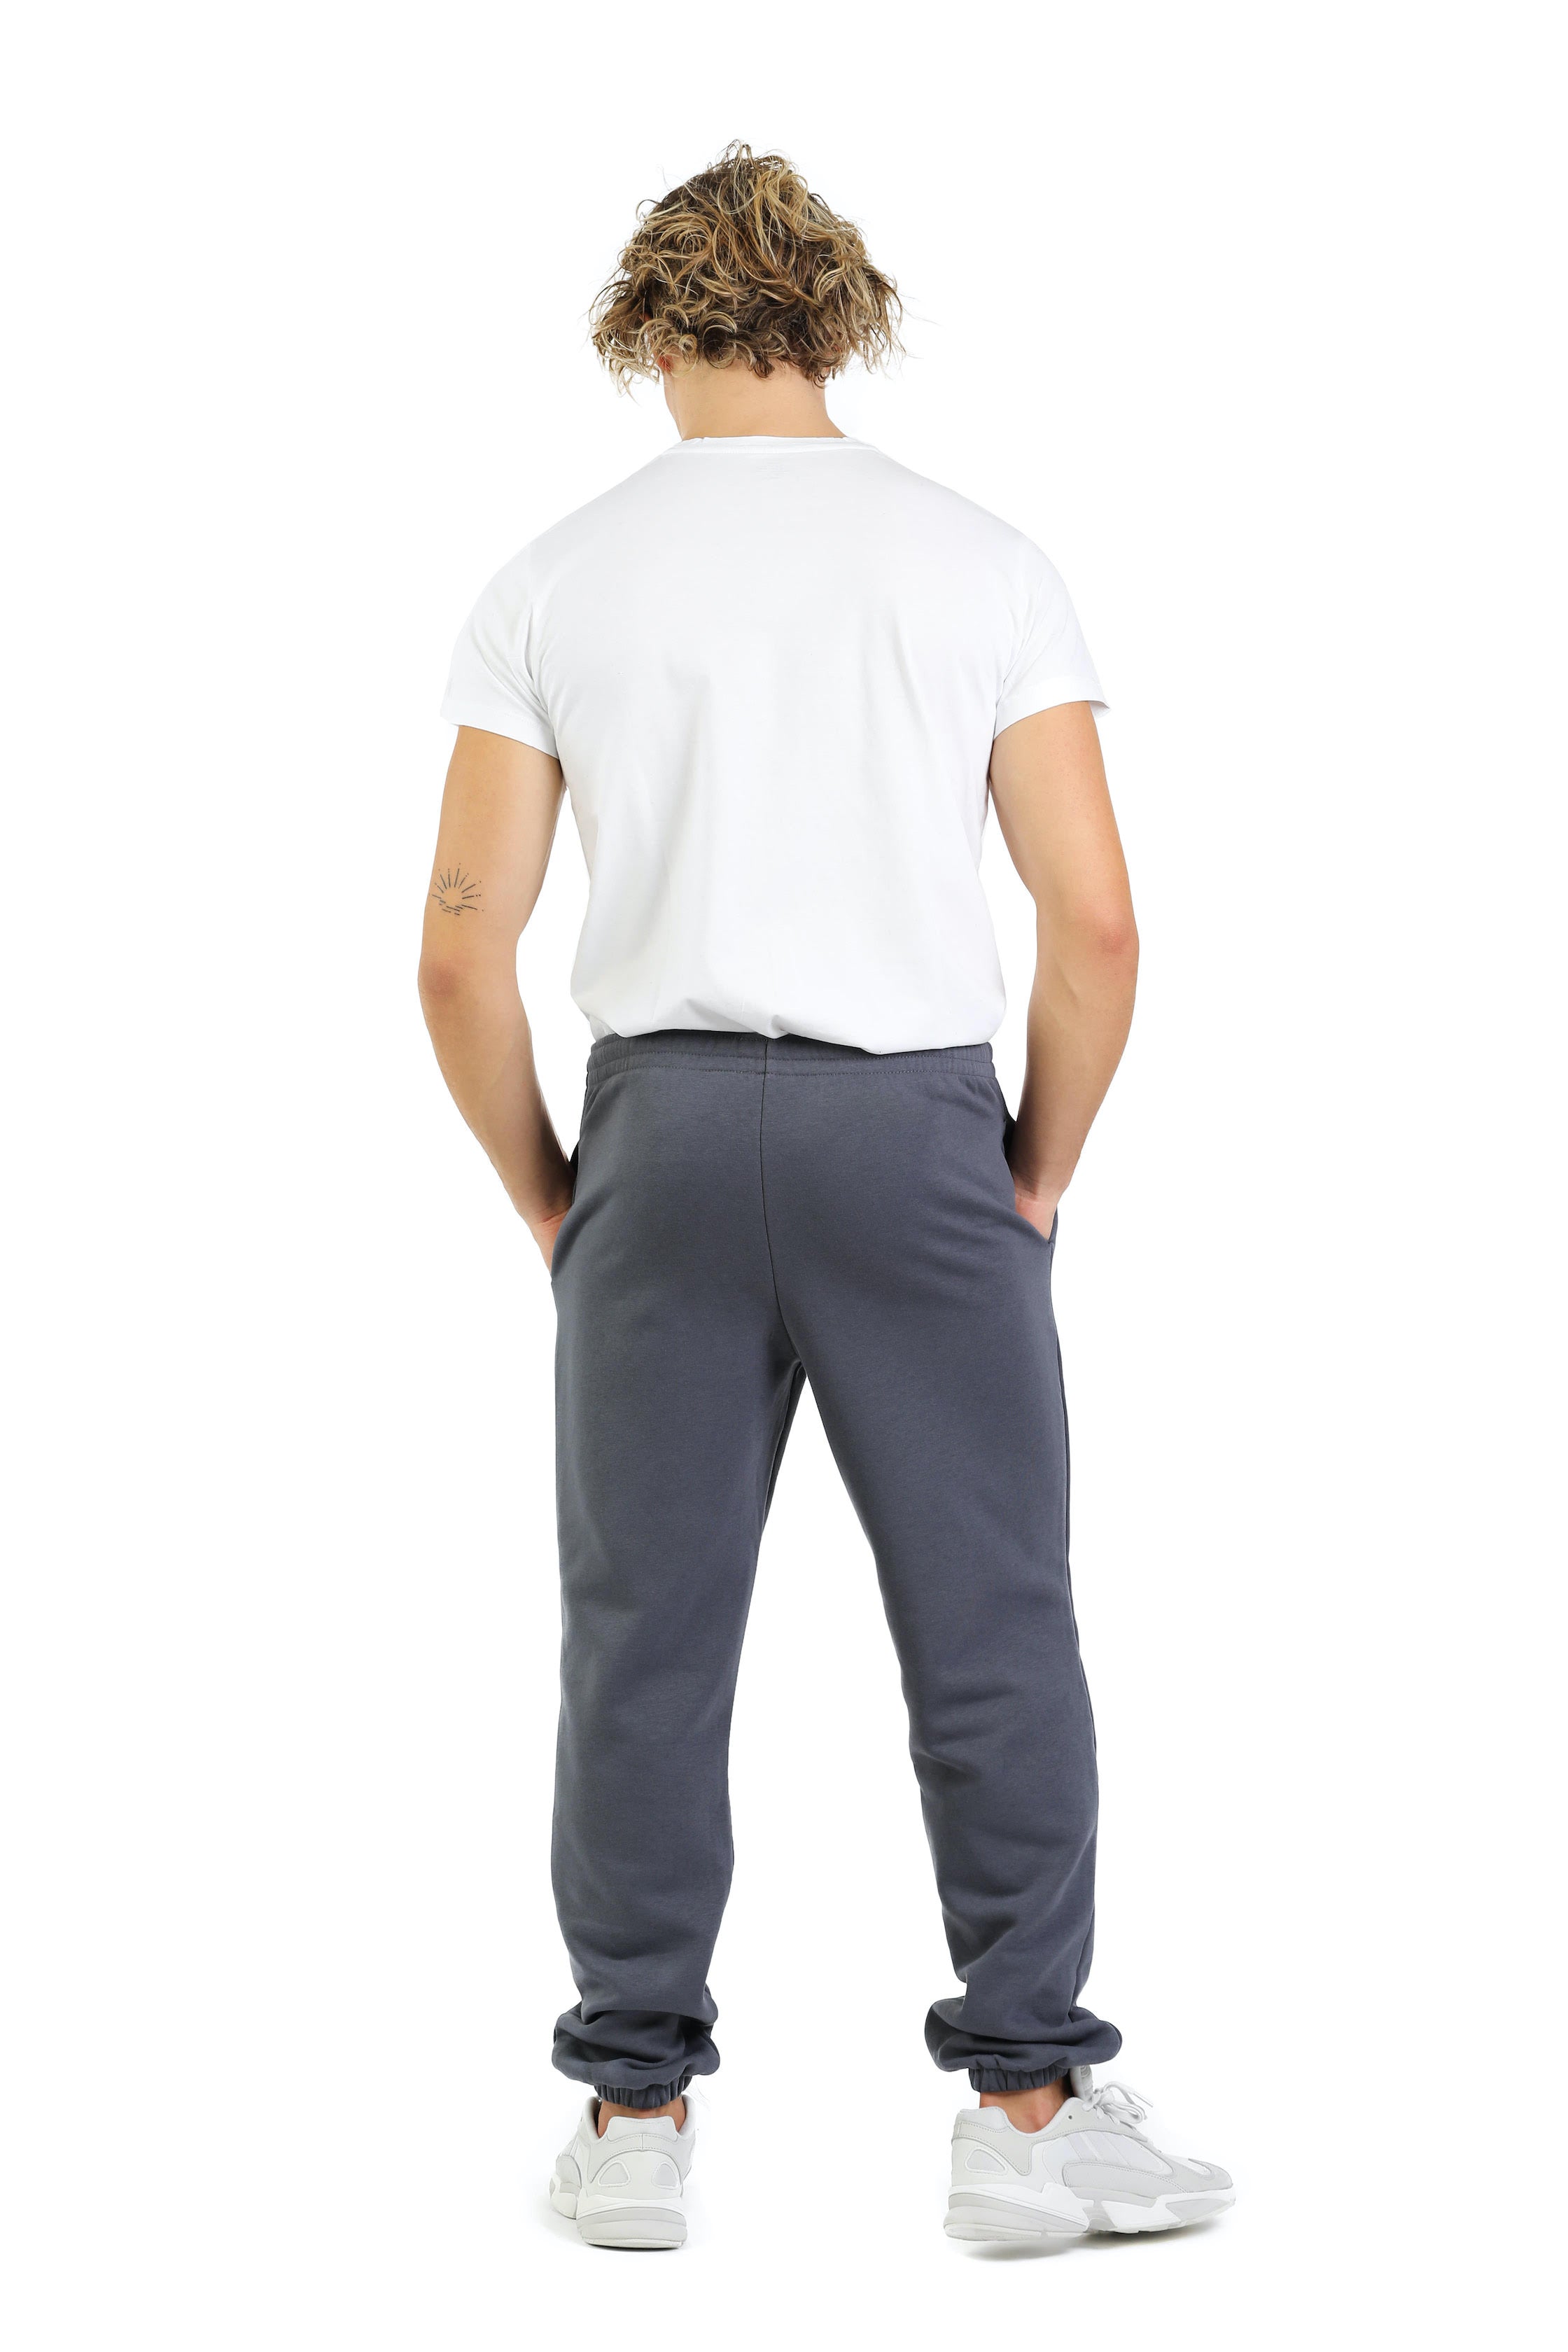 Mens > The Lazypants Canada Website. Sale Cheap Hot Products